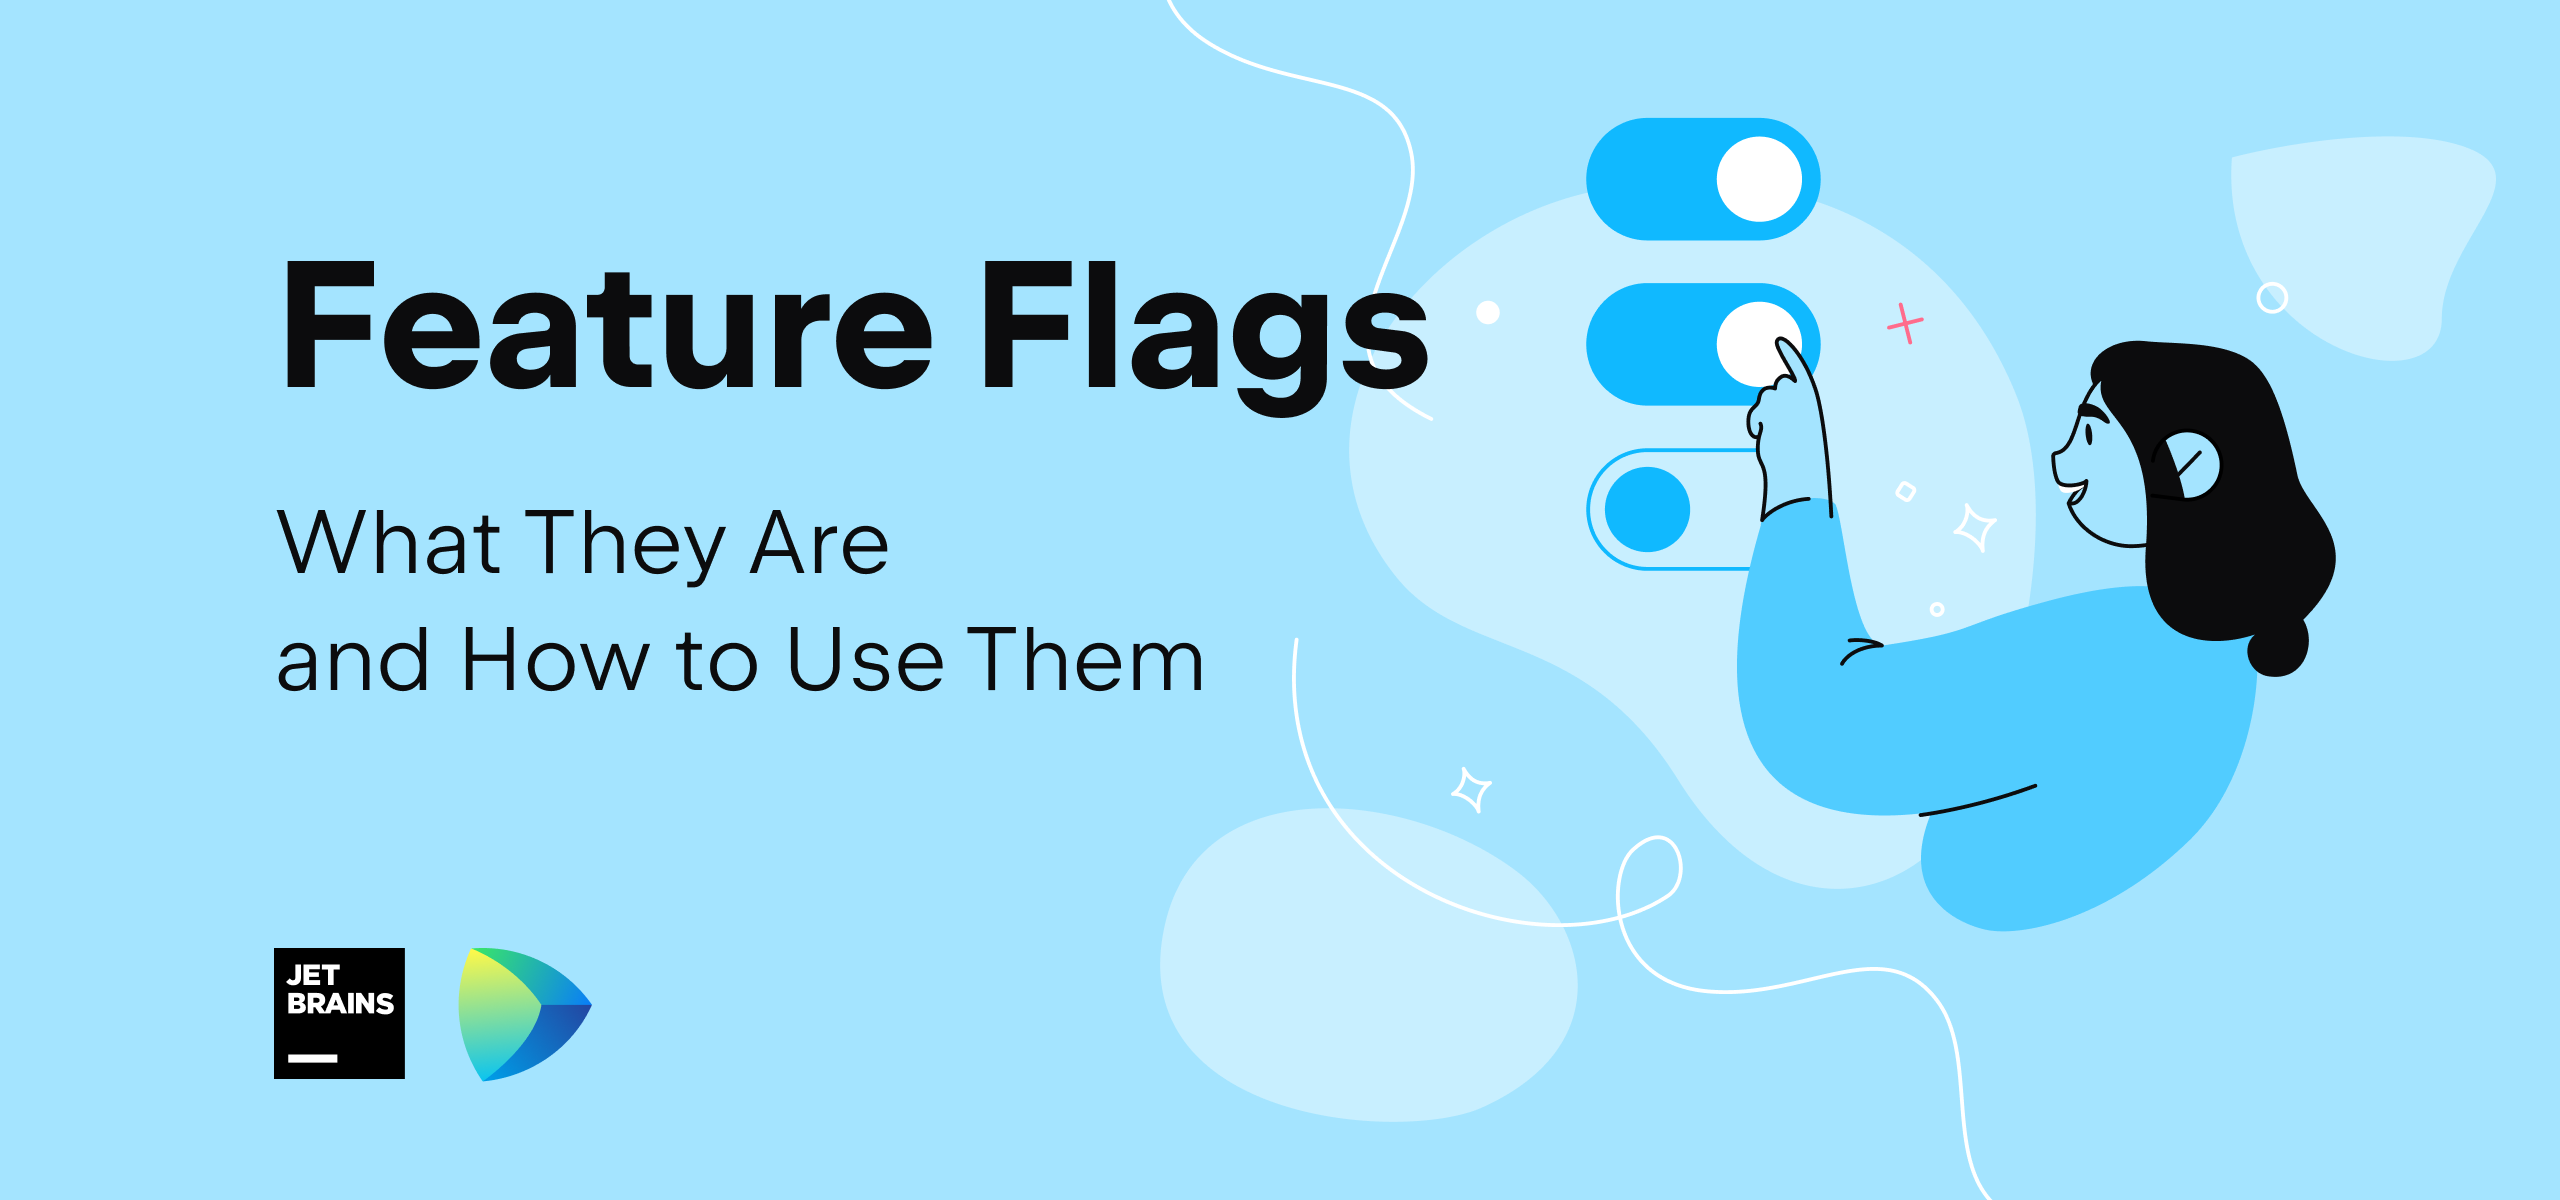 Feature flags